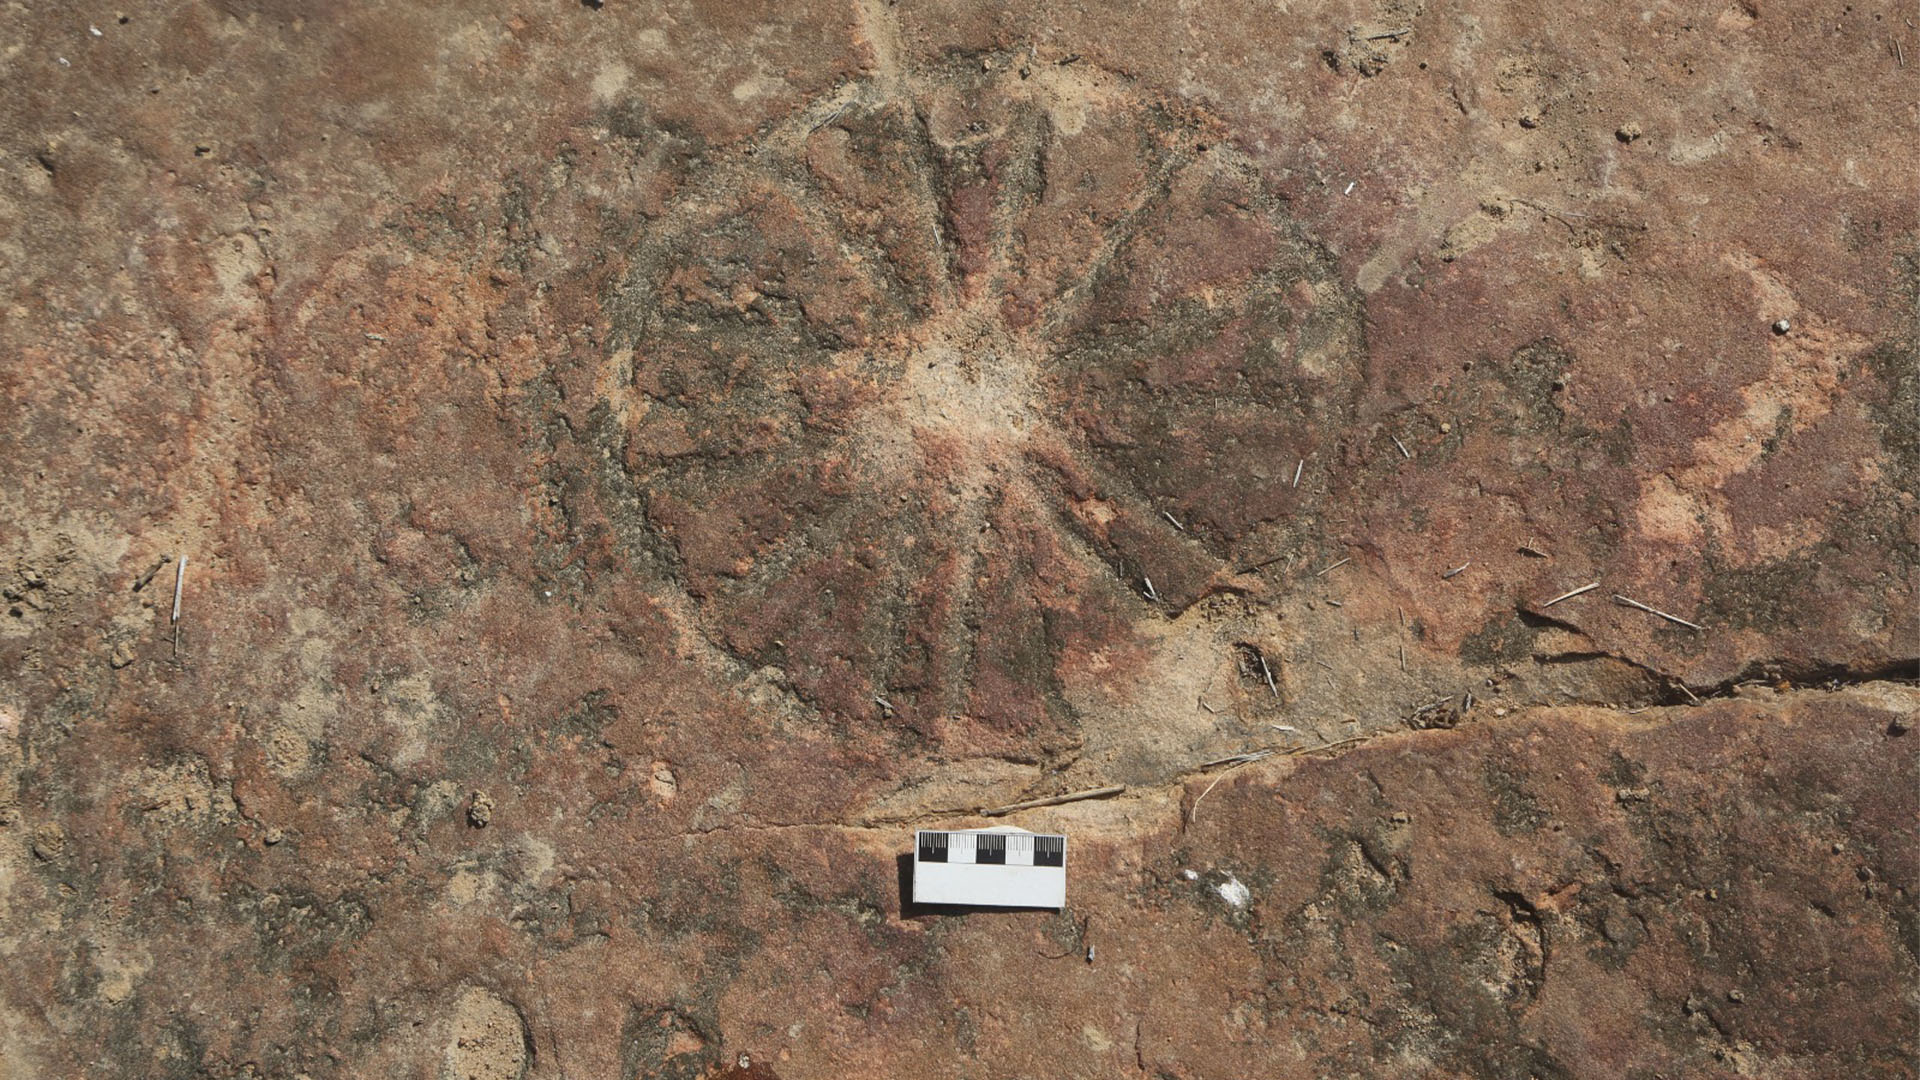 Rock art is attributed to small semi-nomadic groups of hunter-gatherers.